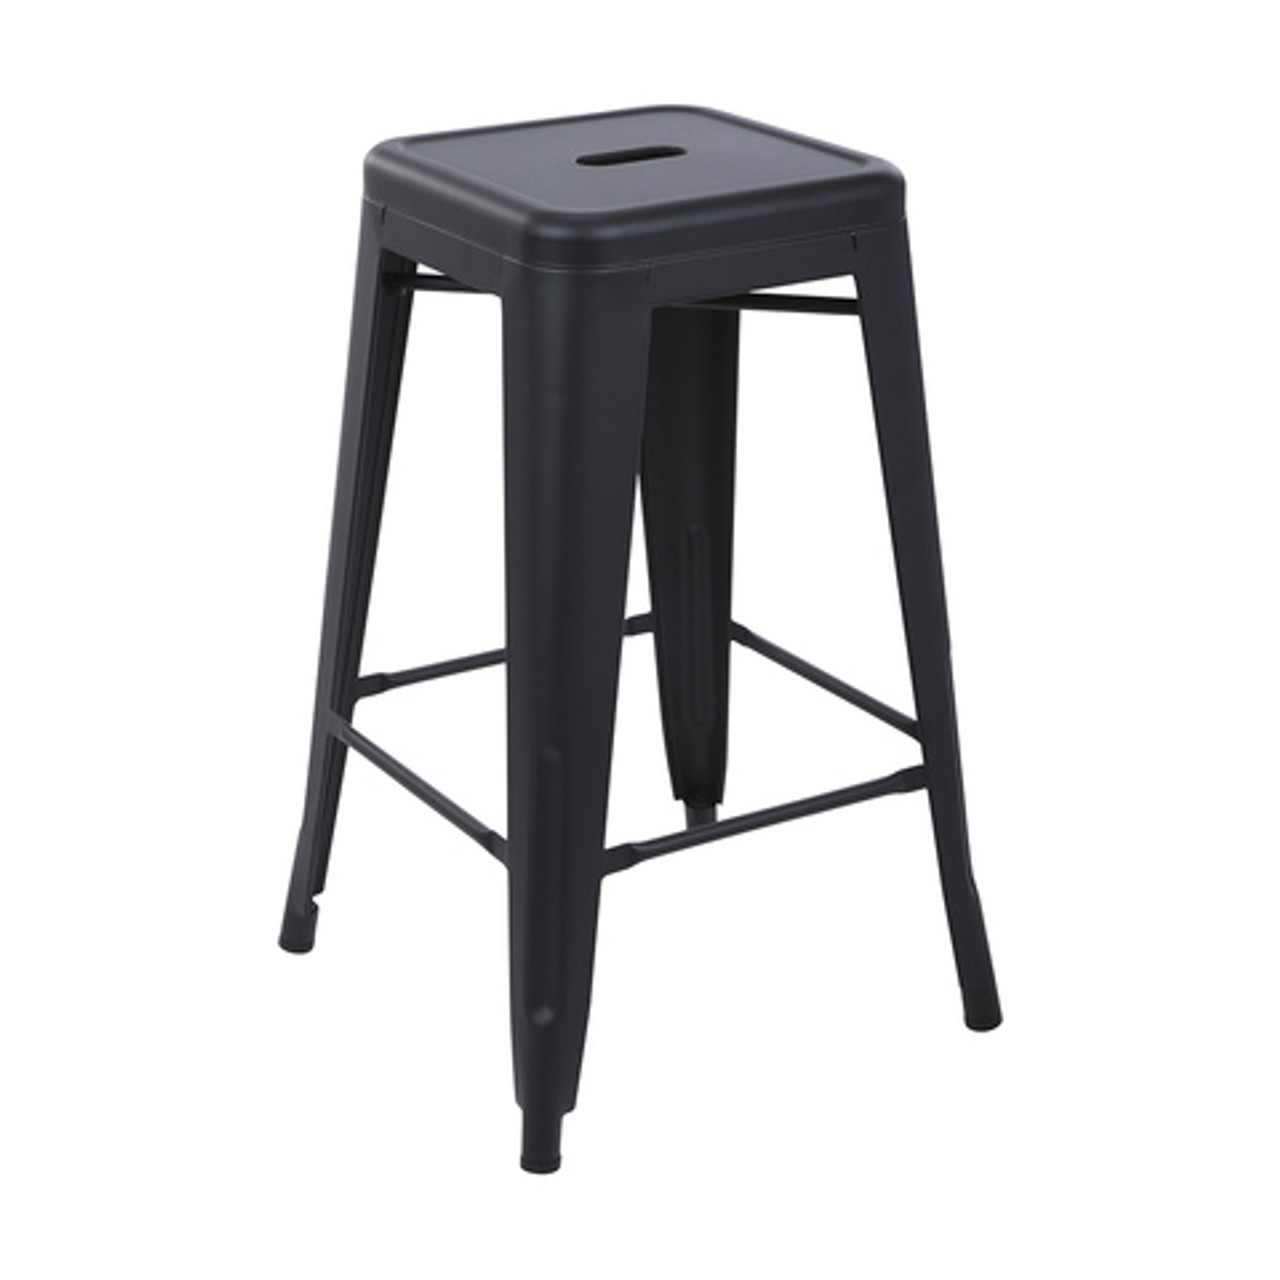 Bar Stools Black Metal. HIRE ONLY. PERTH METRO DELIVERY ONLY OR STORE PICK UP.